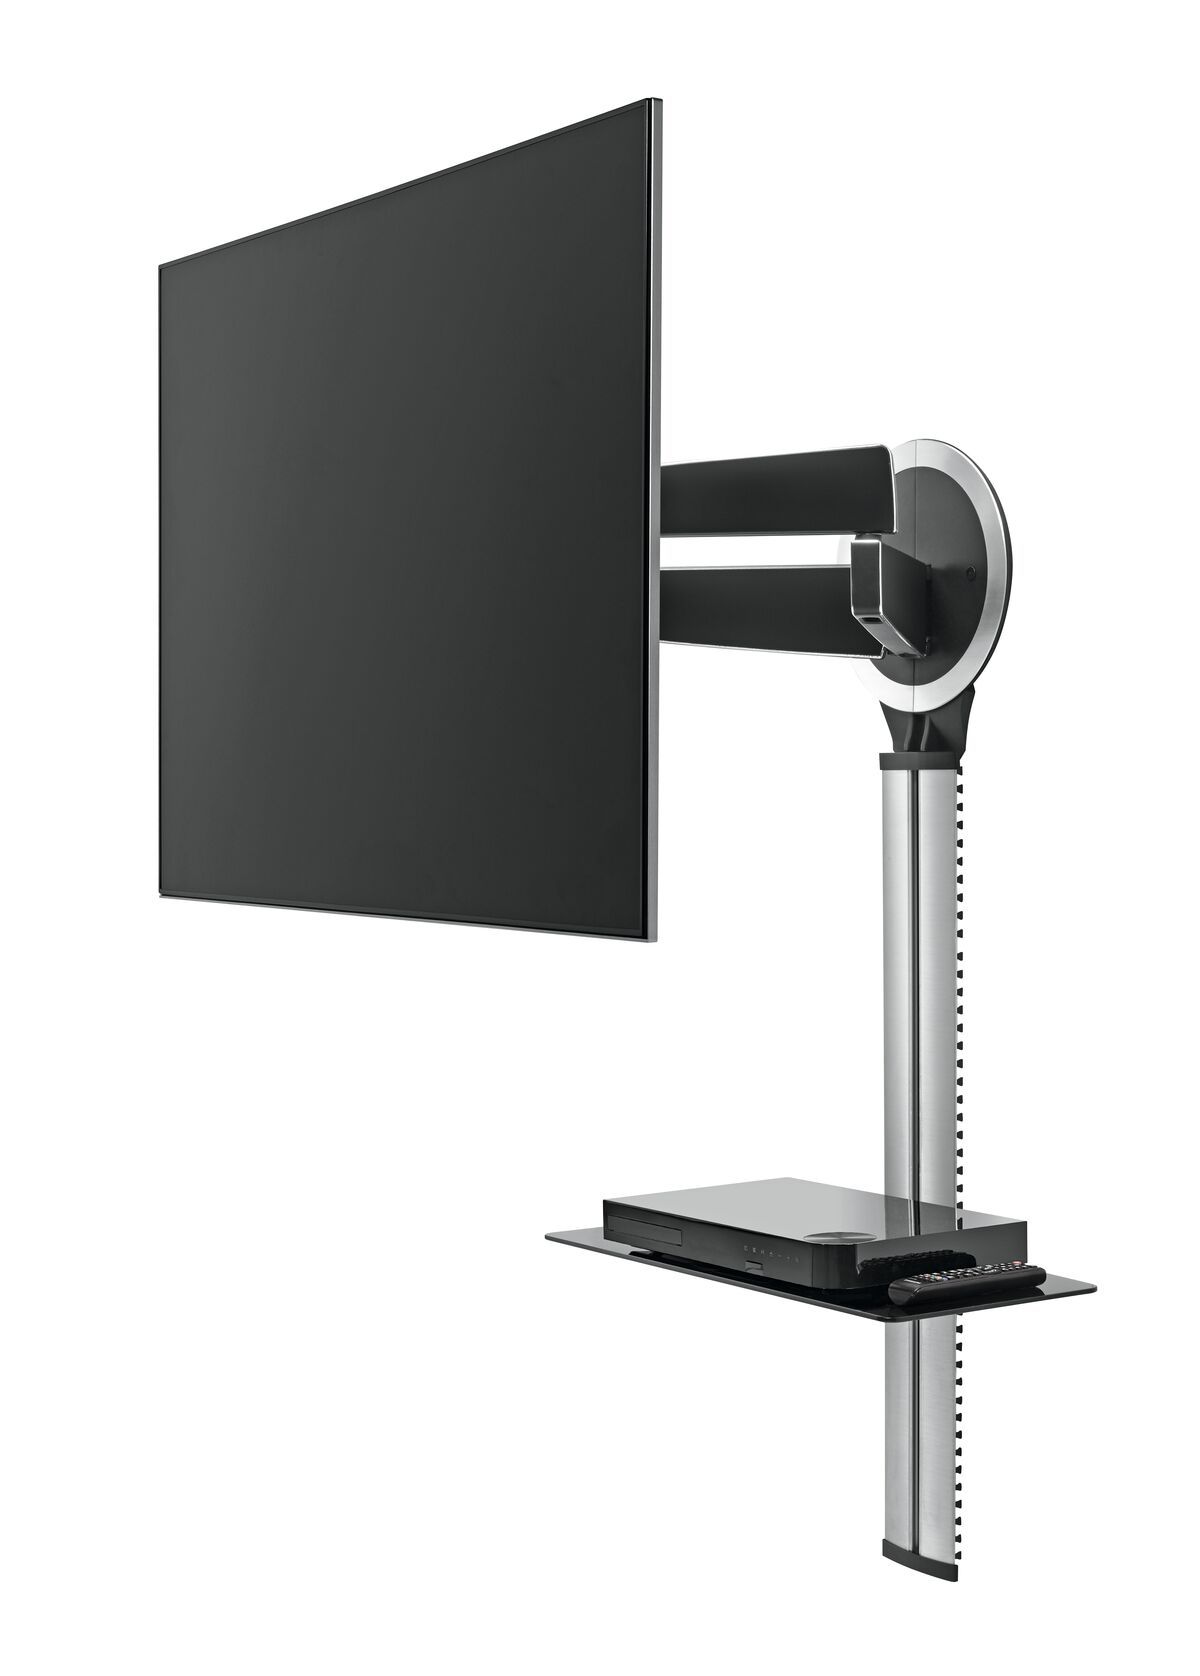 Vogel's DesignMount (NEXT 7345) Full-Motion TV Wall Mount - Suitable for 40 up to 65 inch TVs up to Motion (up to 120°) - Application